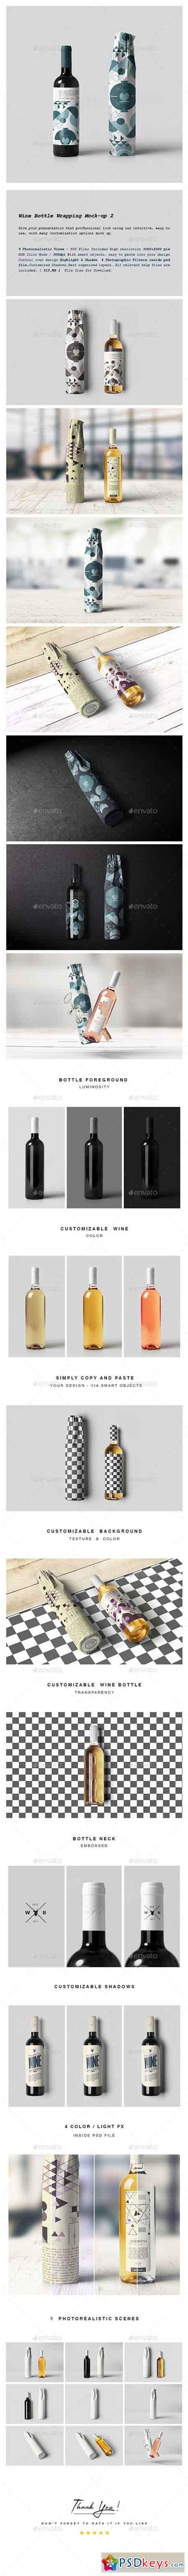 Wine Bottle Wrapping Mock-up 2 20824978